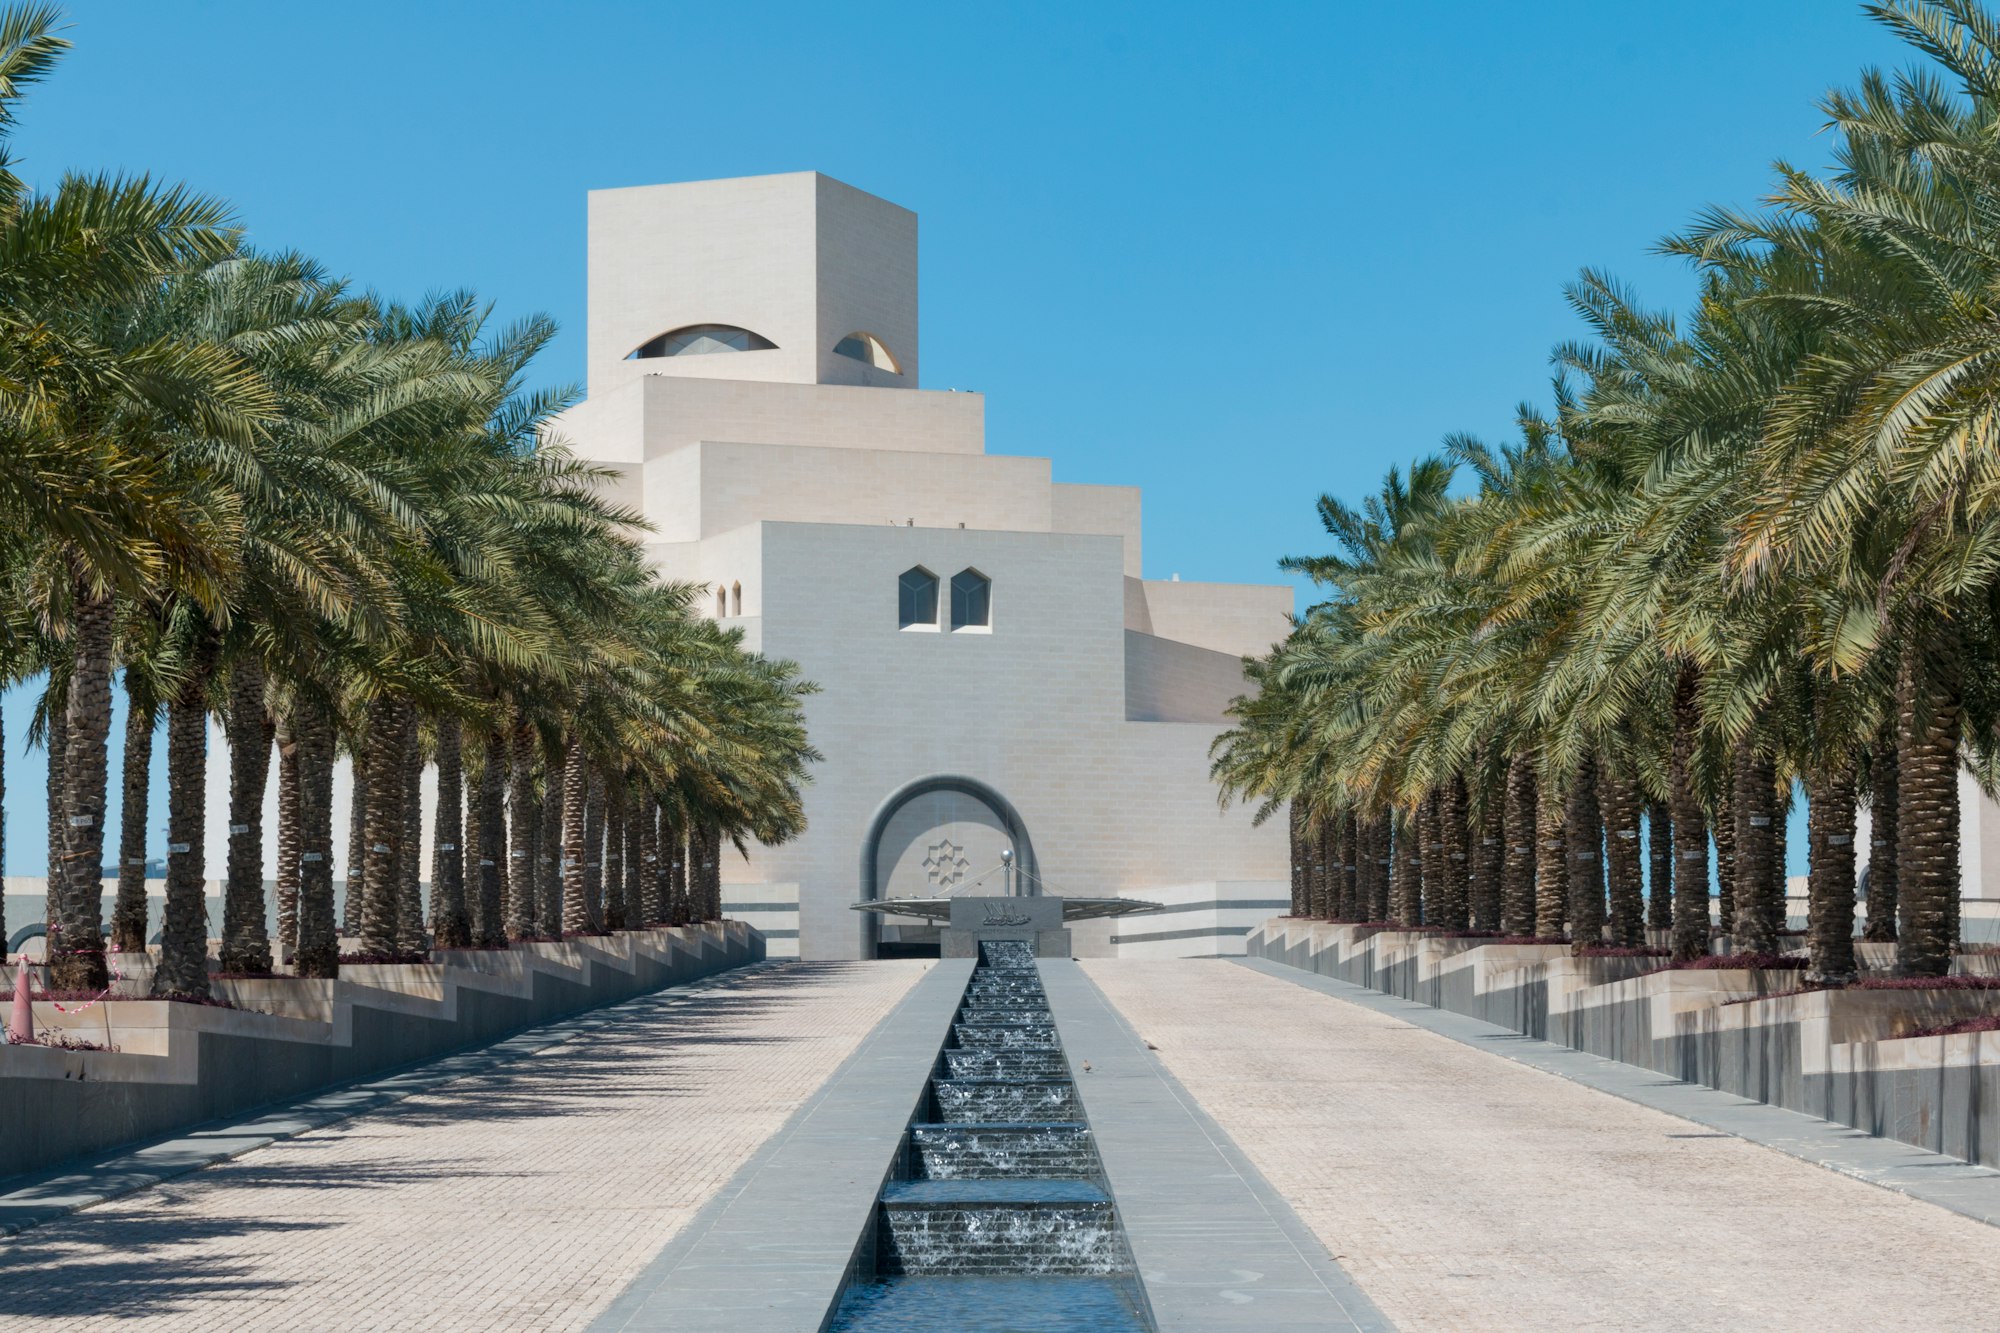 The Museum of Islamic Art is a museum on one end of the seven-kilometer-long Corniche in Doha, Qatar.